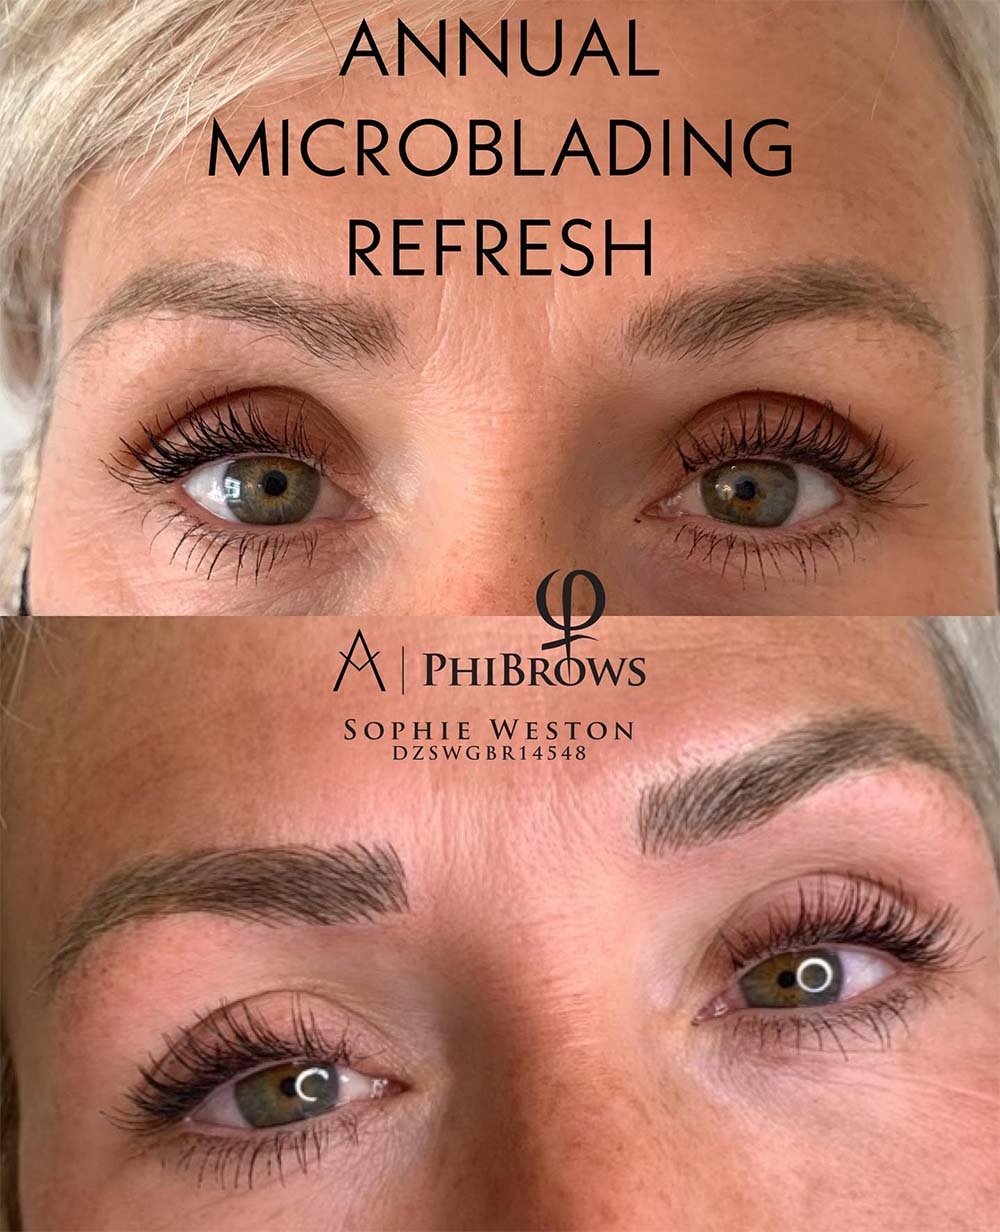 Microblading Touch Up After a Year And All the Future Microblading Touch Ups